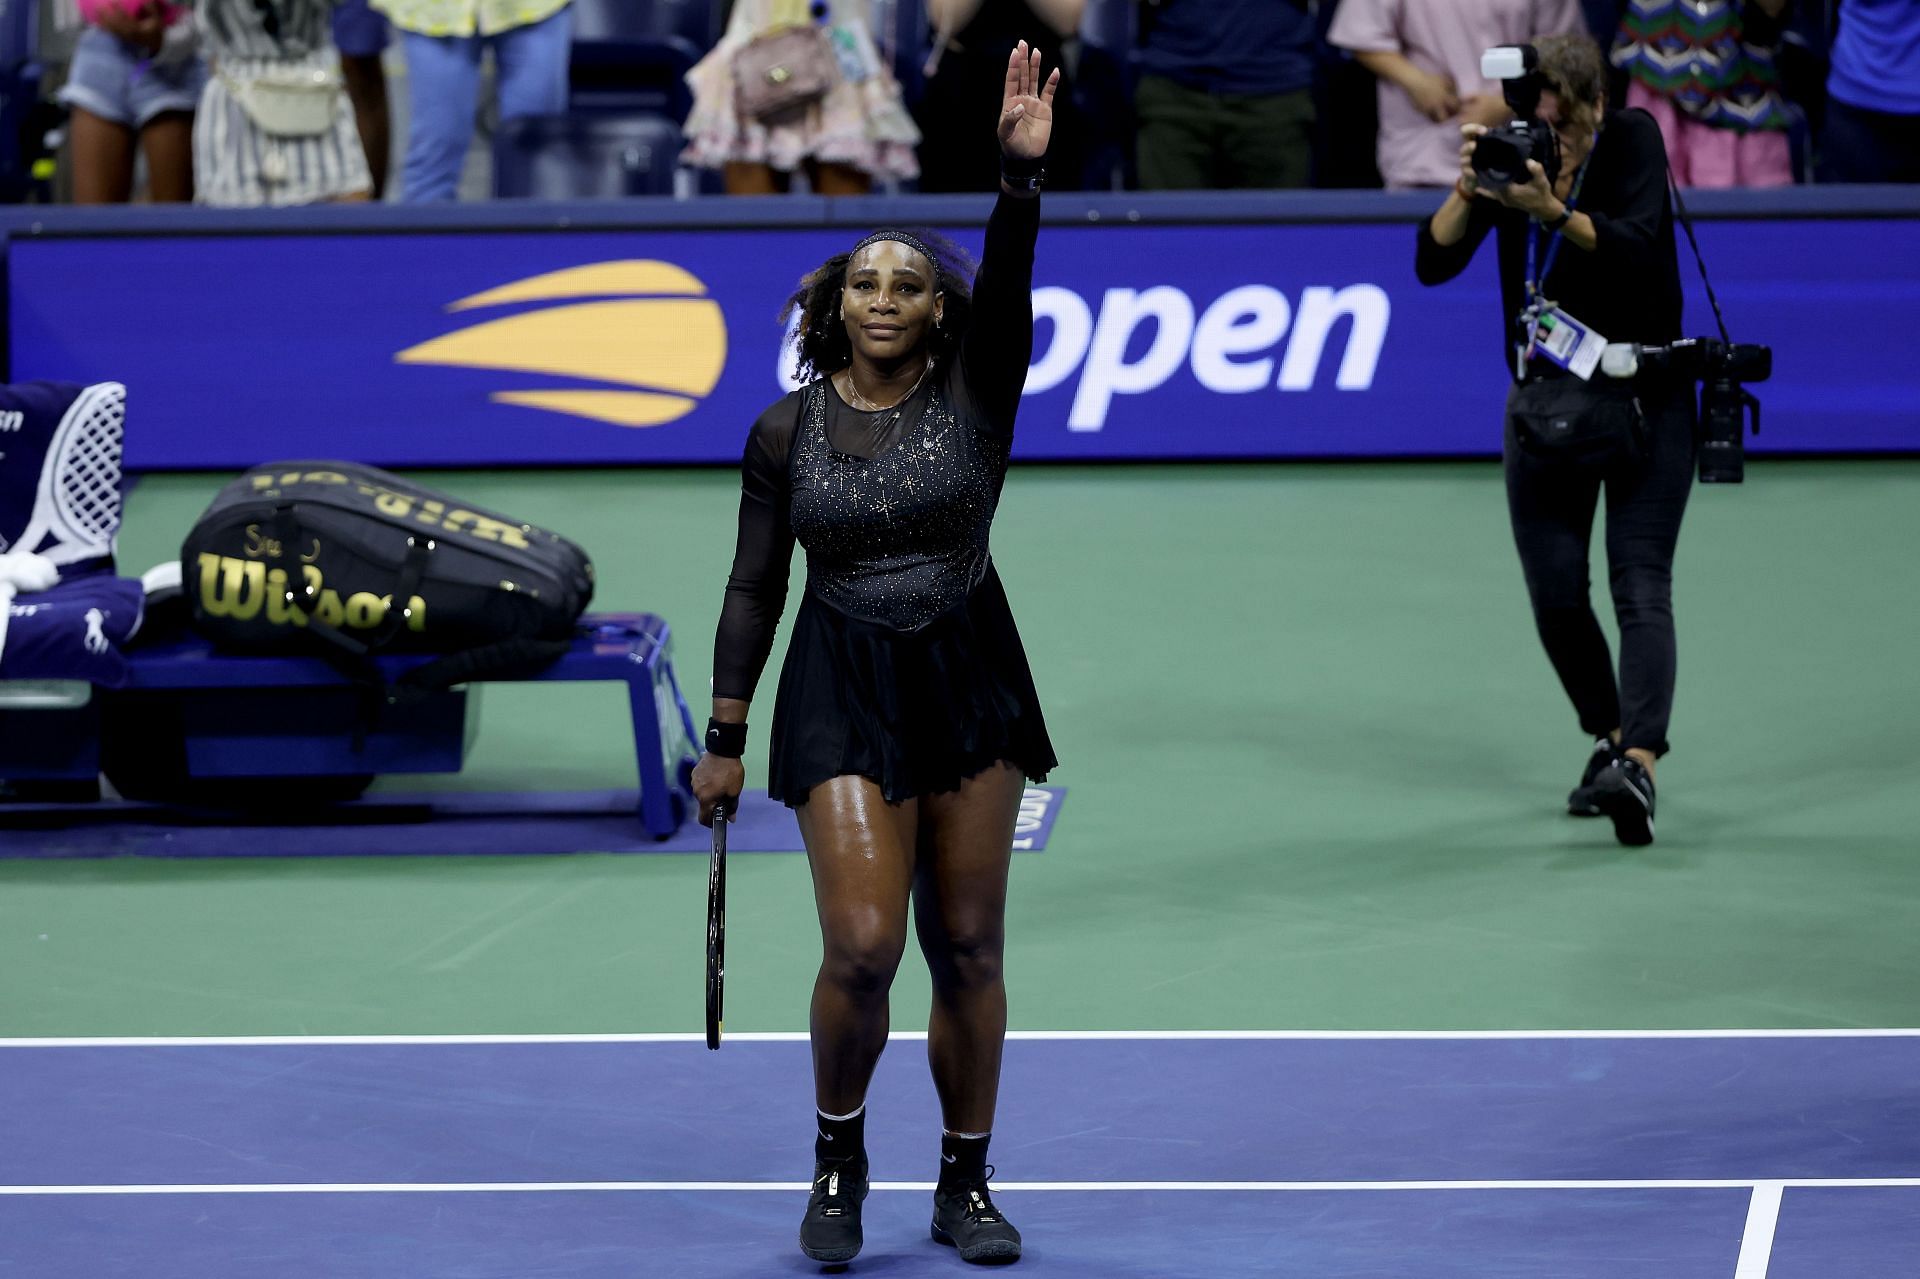 Williams after the final match of her career at the 2022 US Open